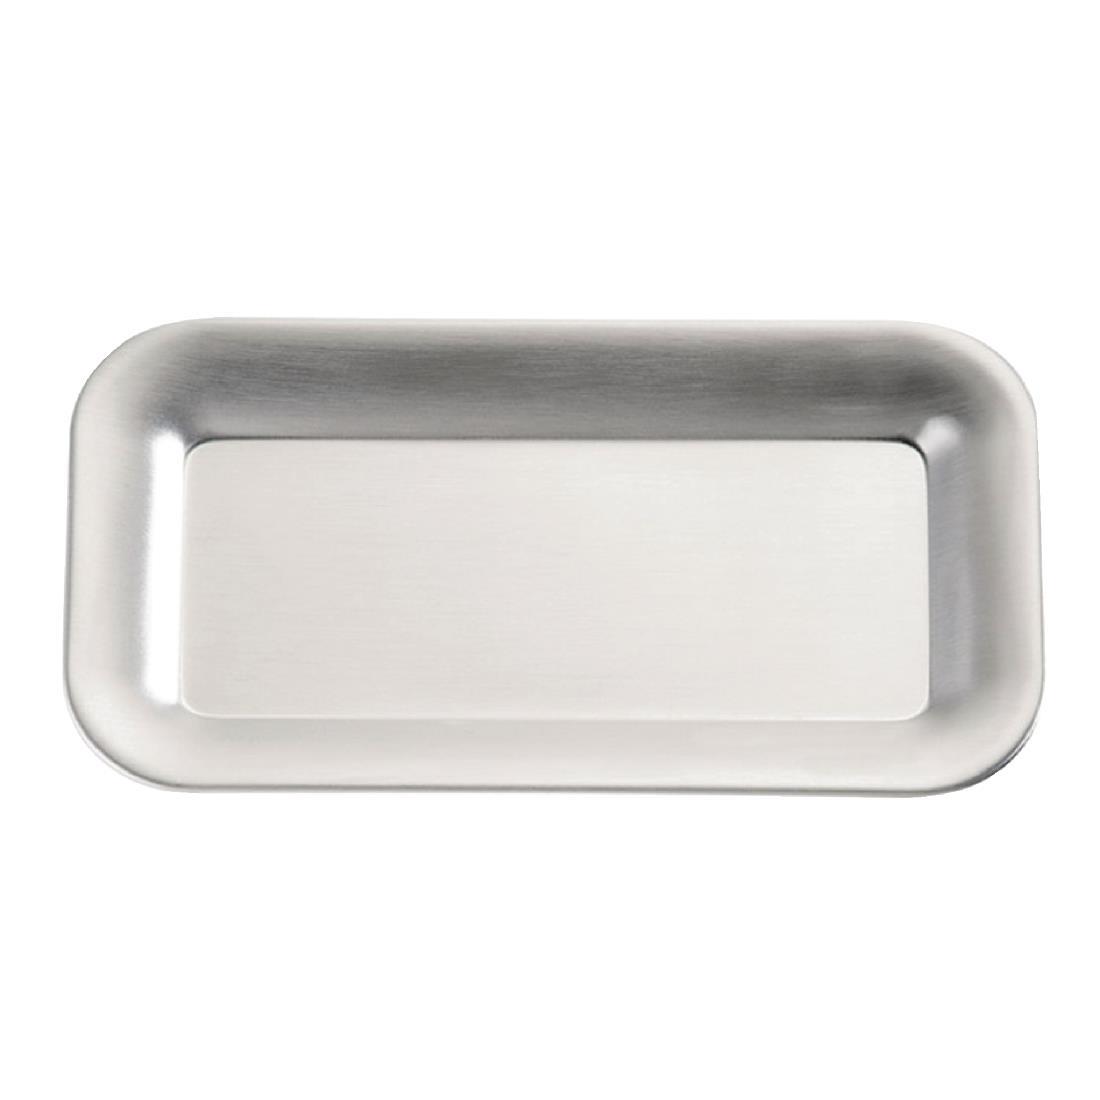 APS Pure Stainless Steel Tray 200 x 110mm - GF160  - 1